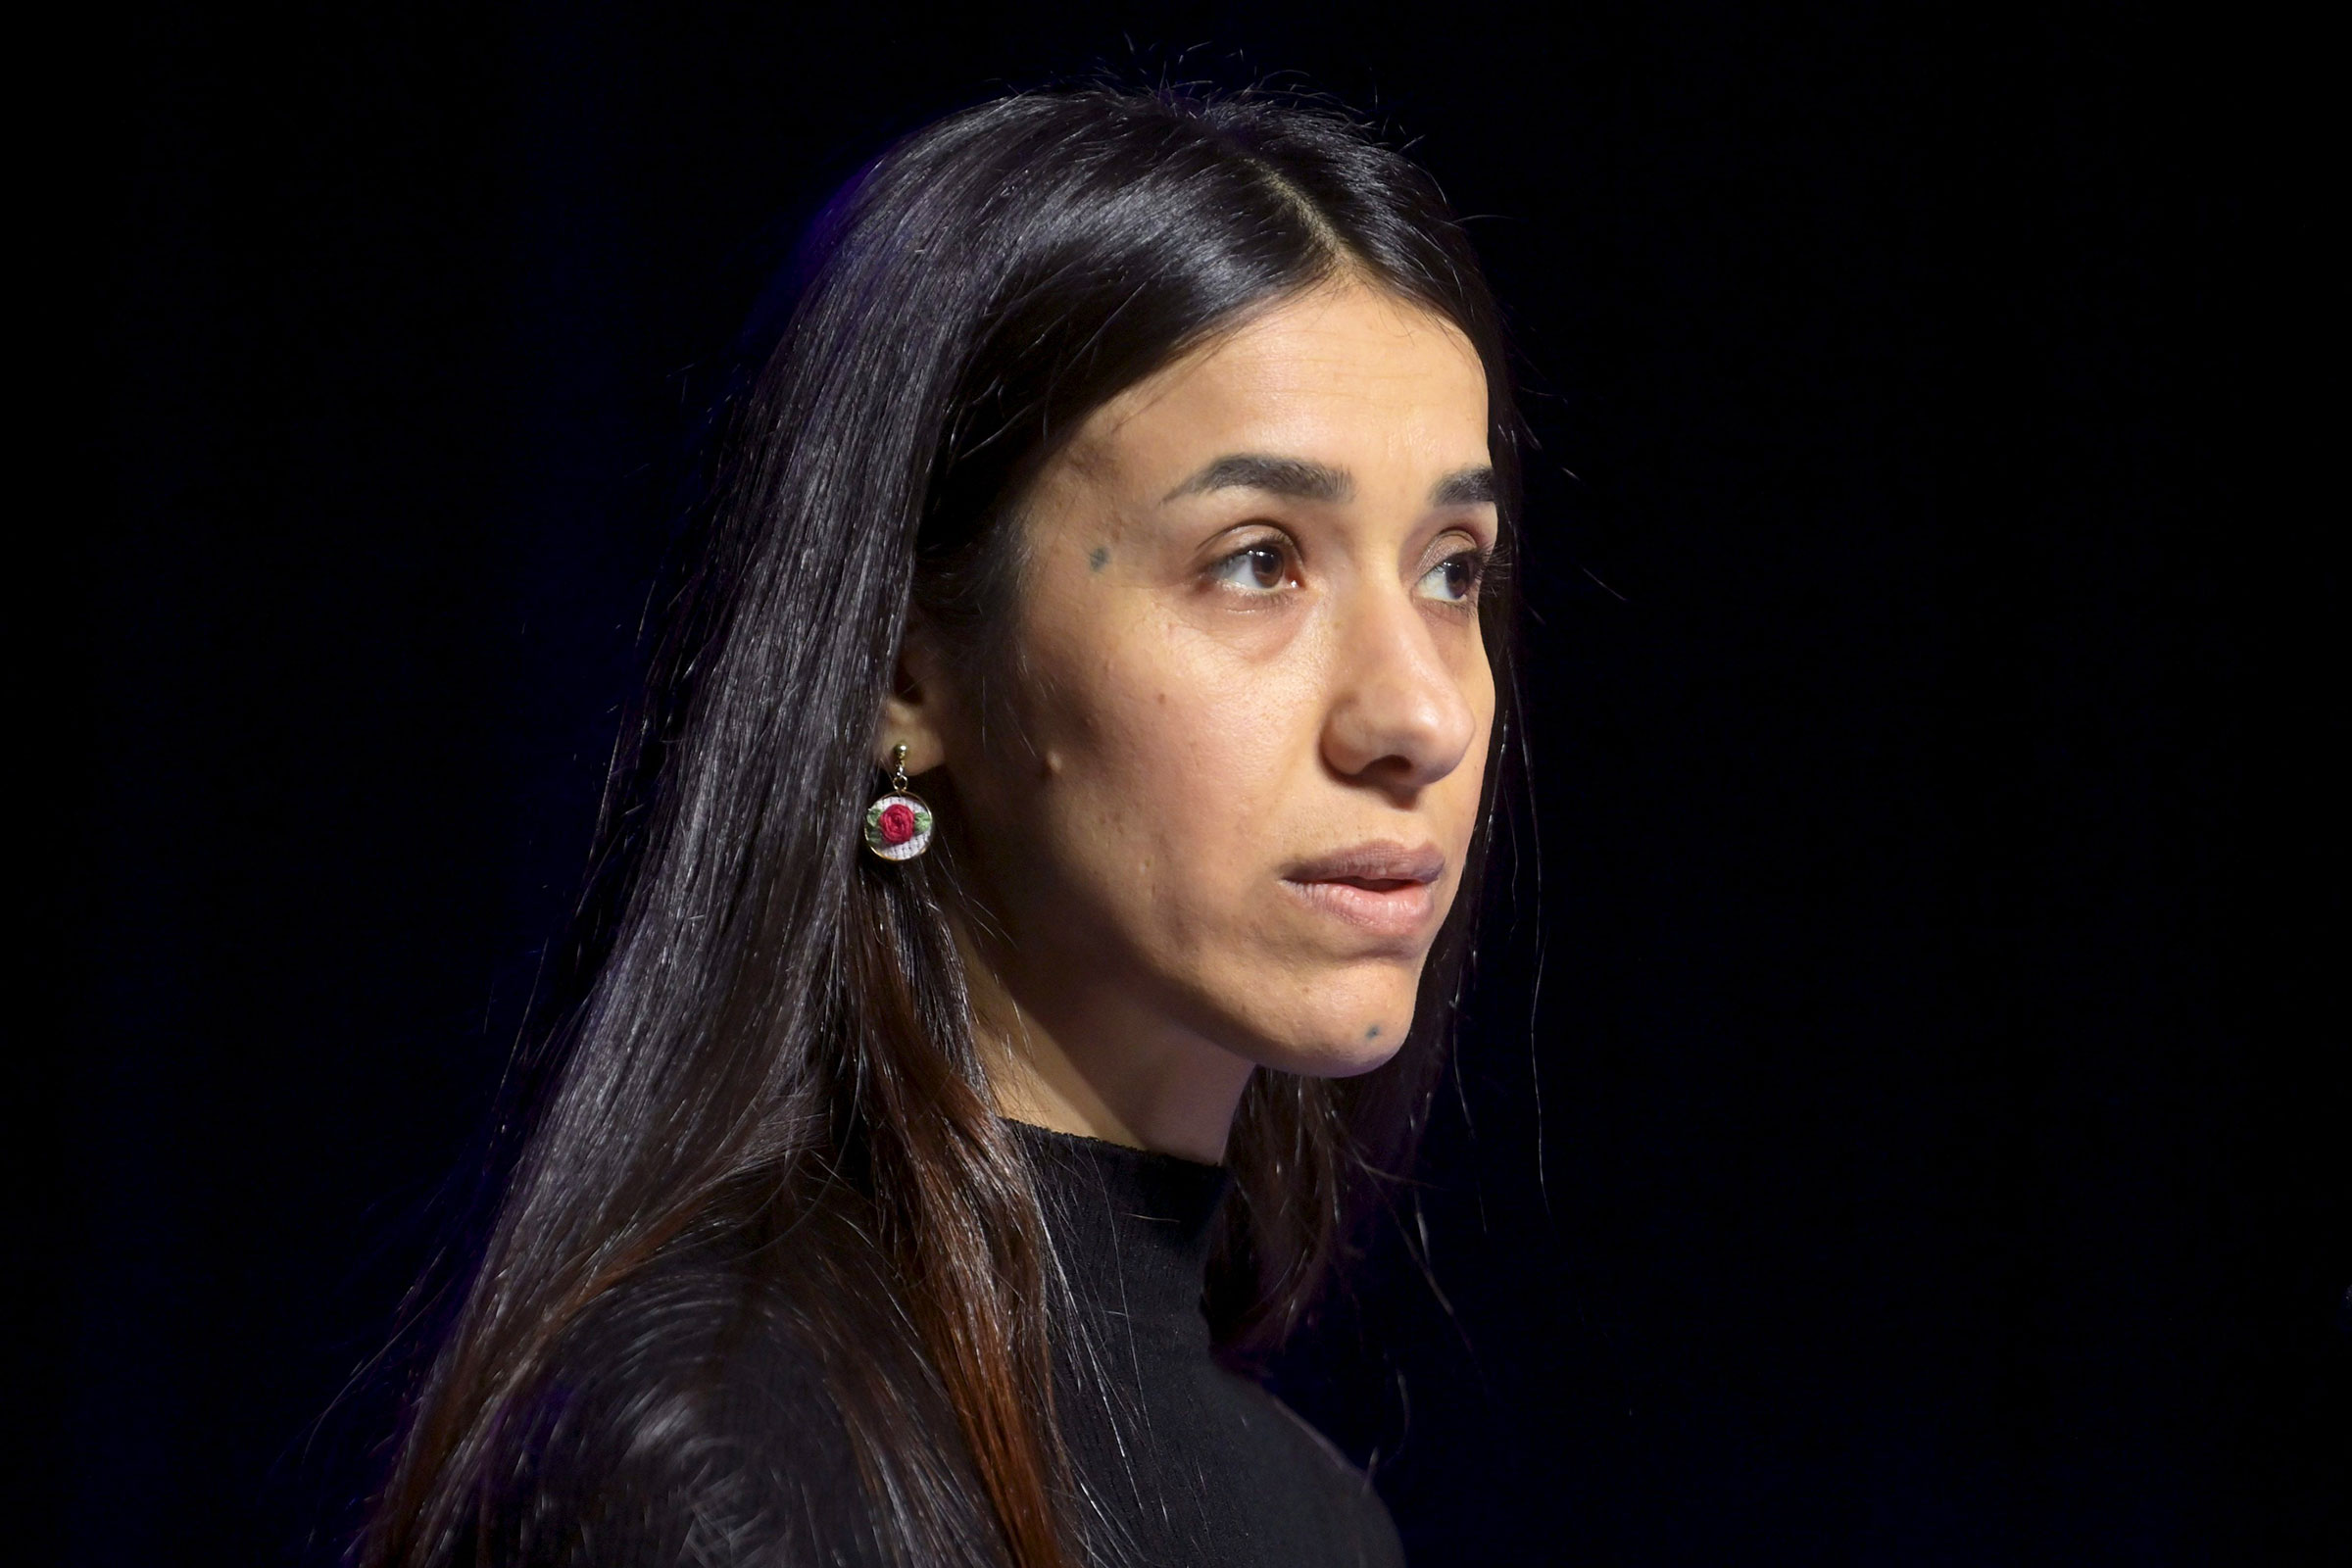 Yazidi activist and the co-recipient of the 2018 Nobel Peace Prize, Nadia Murad at the International Gender Equality Prize ceremony in Finland, on Nov. 22, 2021. (Vesa Moilanen—Shutterstock)